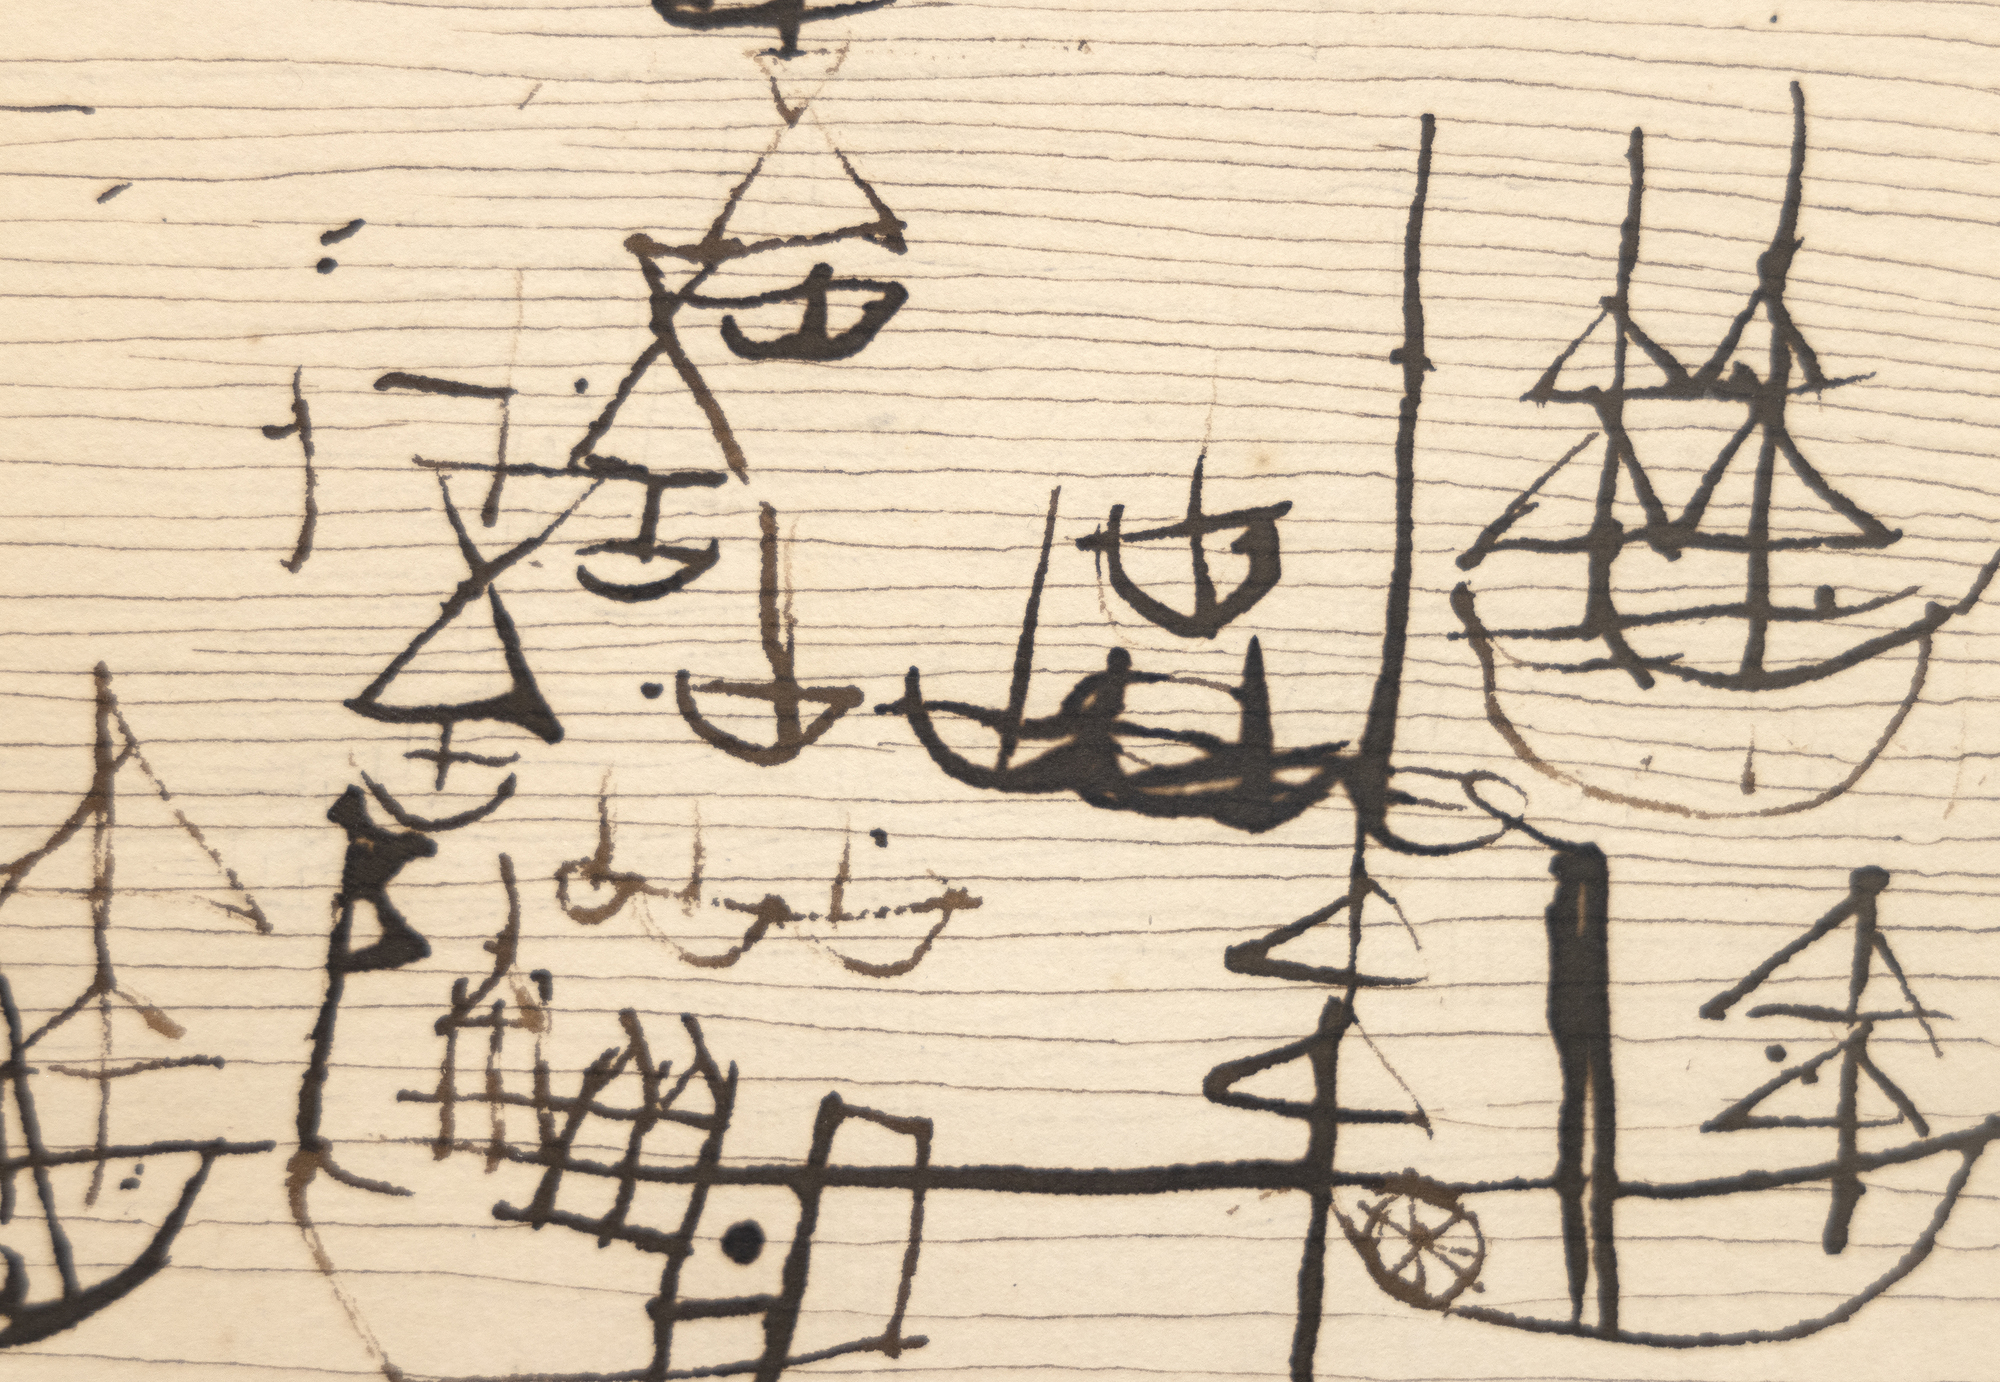 "A drawing is simply a line going for a walk."<br>-Paul Klee<br><br>A significant draftsman, Paul Klee's works on paper rival his works on canvas in their technical proficiency and attention to his modern aesthetic.  As an early teacher at the Bauhaus school, Klee traveled extensively and inspired a generation of 20th Century Artists.  <br><br>Klee transcended a particular style, instead creating his own unique visual vocabulary.  In Klee's work, we see a return to basic, geometric forms and a removal of artistic embellishment.  "Der Hafen von Plit" was once owned by Alfred H. Barr, Jr., the First Director of the Museum of Modern Art, New York.